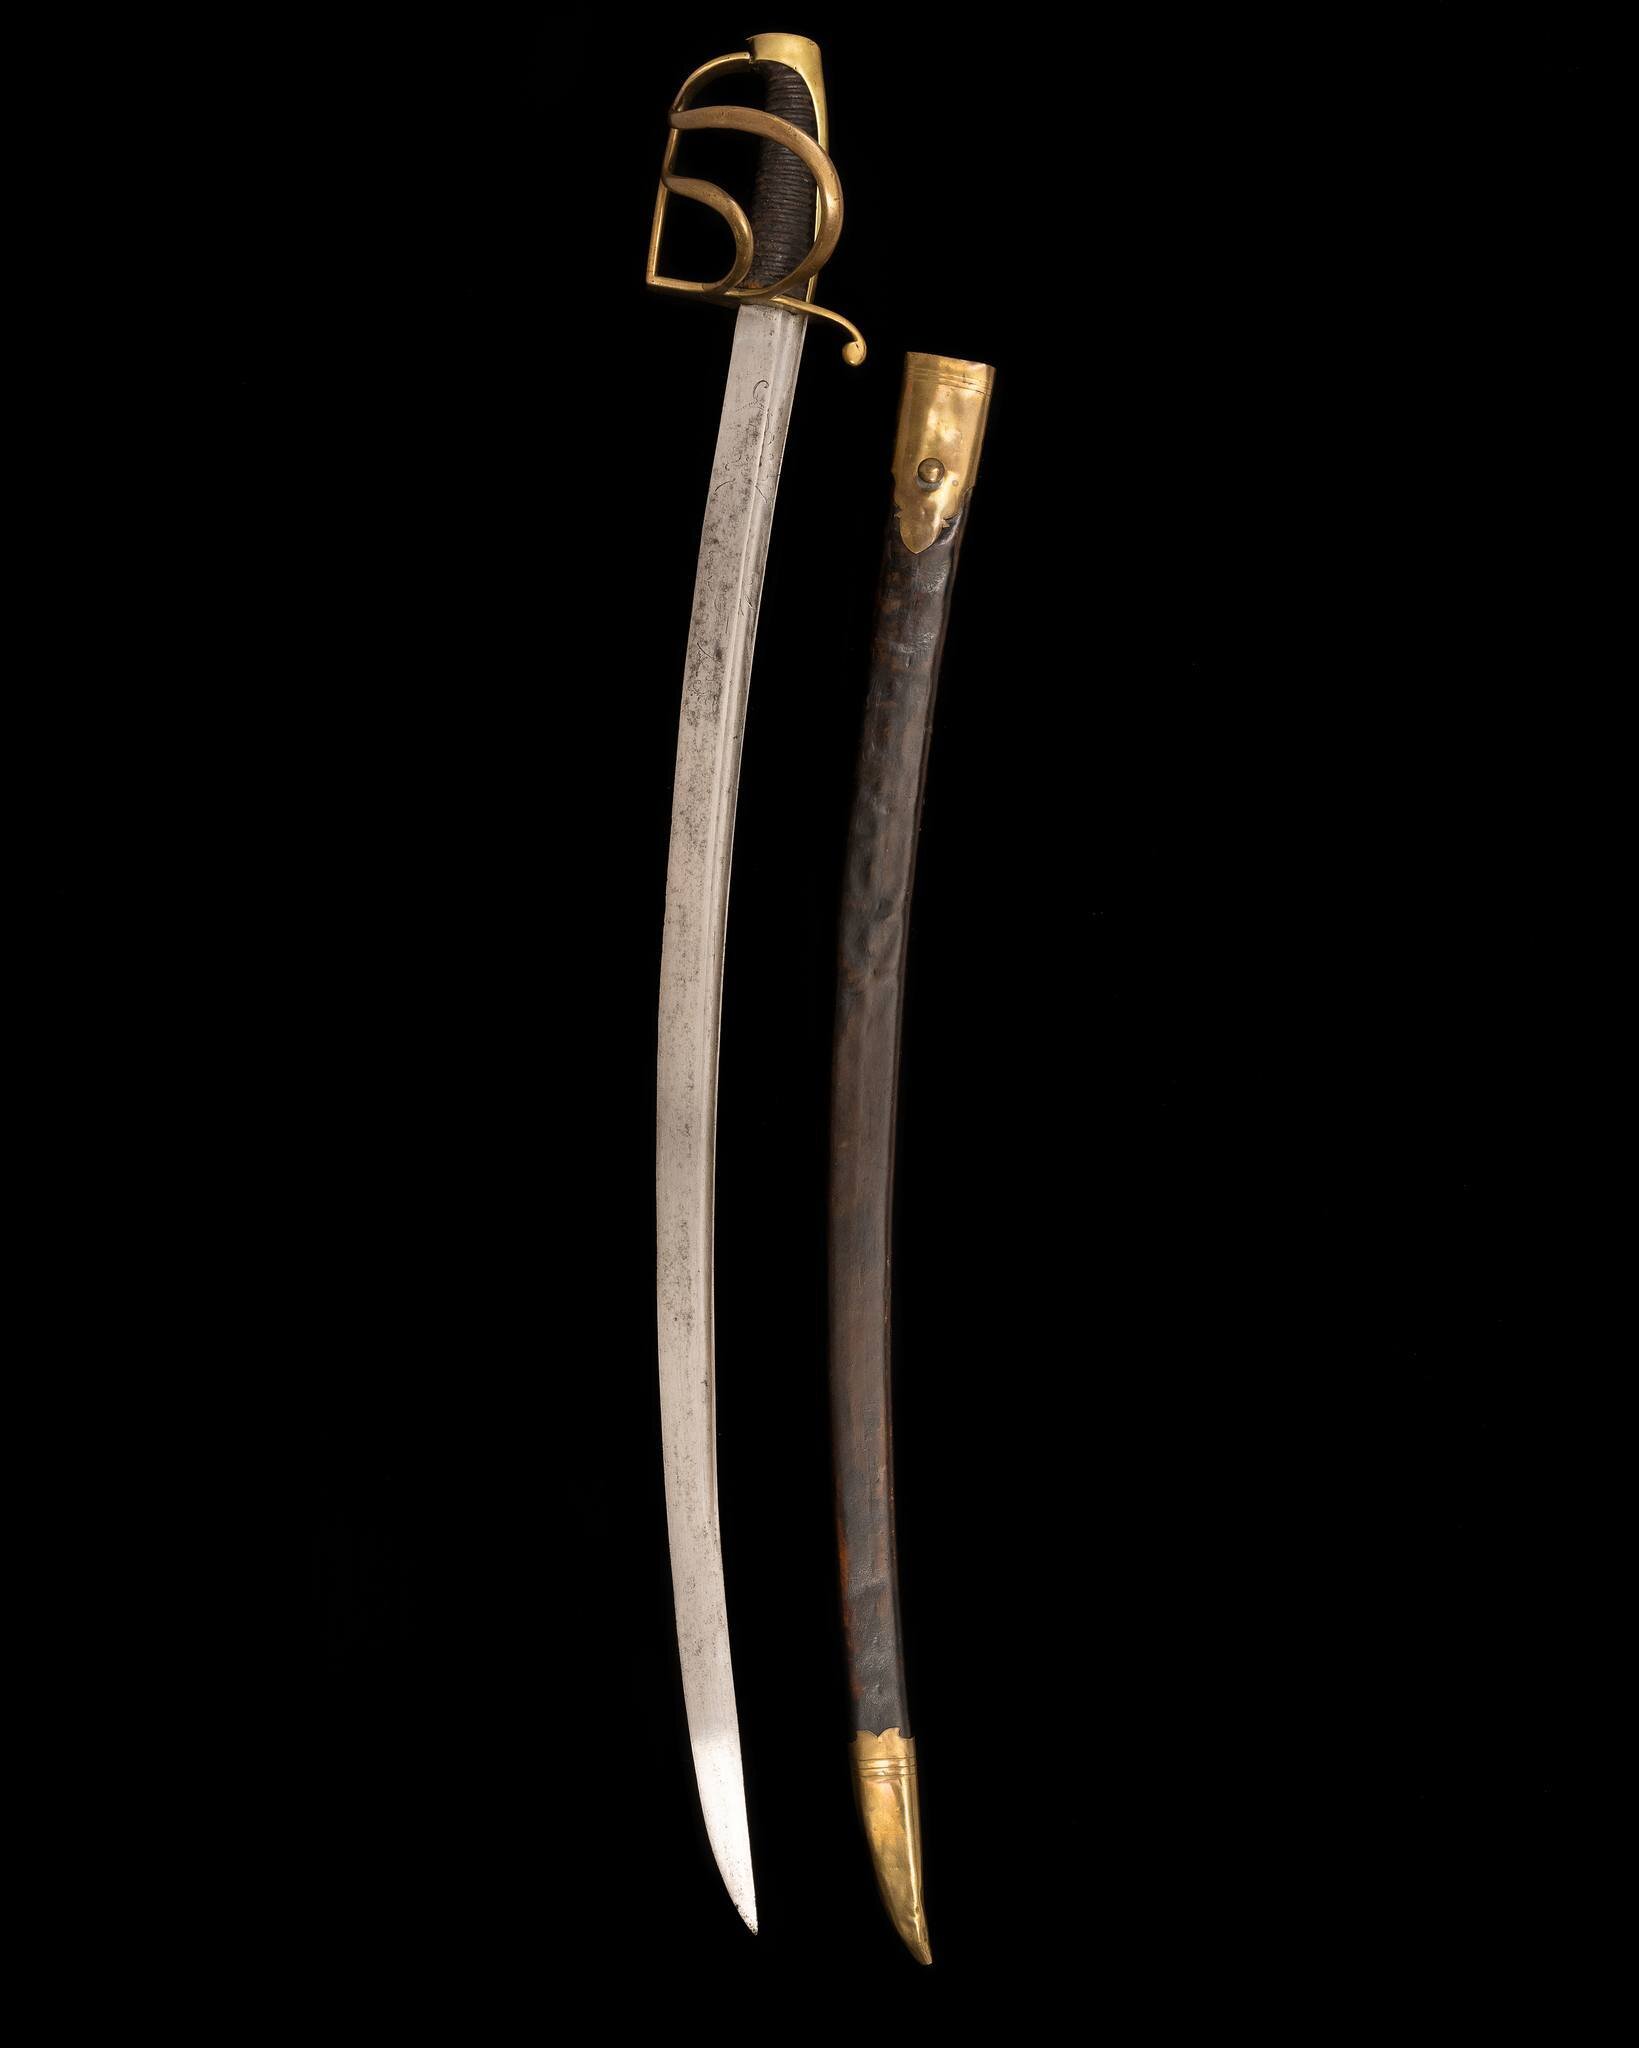 1788 &quot;Rumford&quot; style cavalry sabre

A Bavarian 1788 &quot;Rumford&quot; style cavalry sabre.  The blade shows clear evidence of service sharpening, and would have probably been made to order by a dragoon or an infantry officer. The bars sho